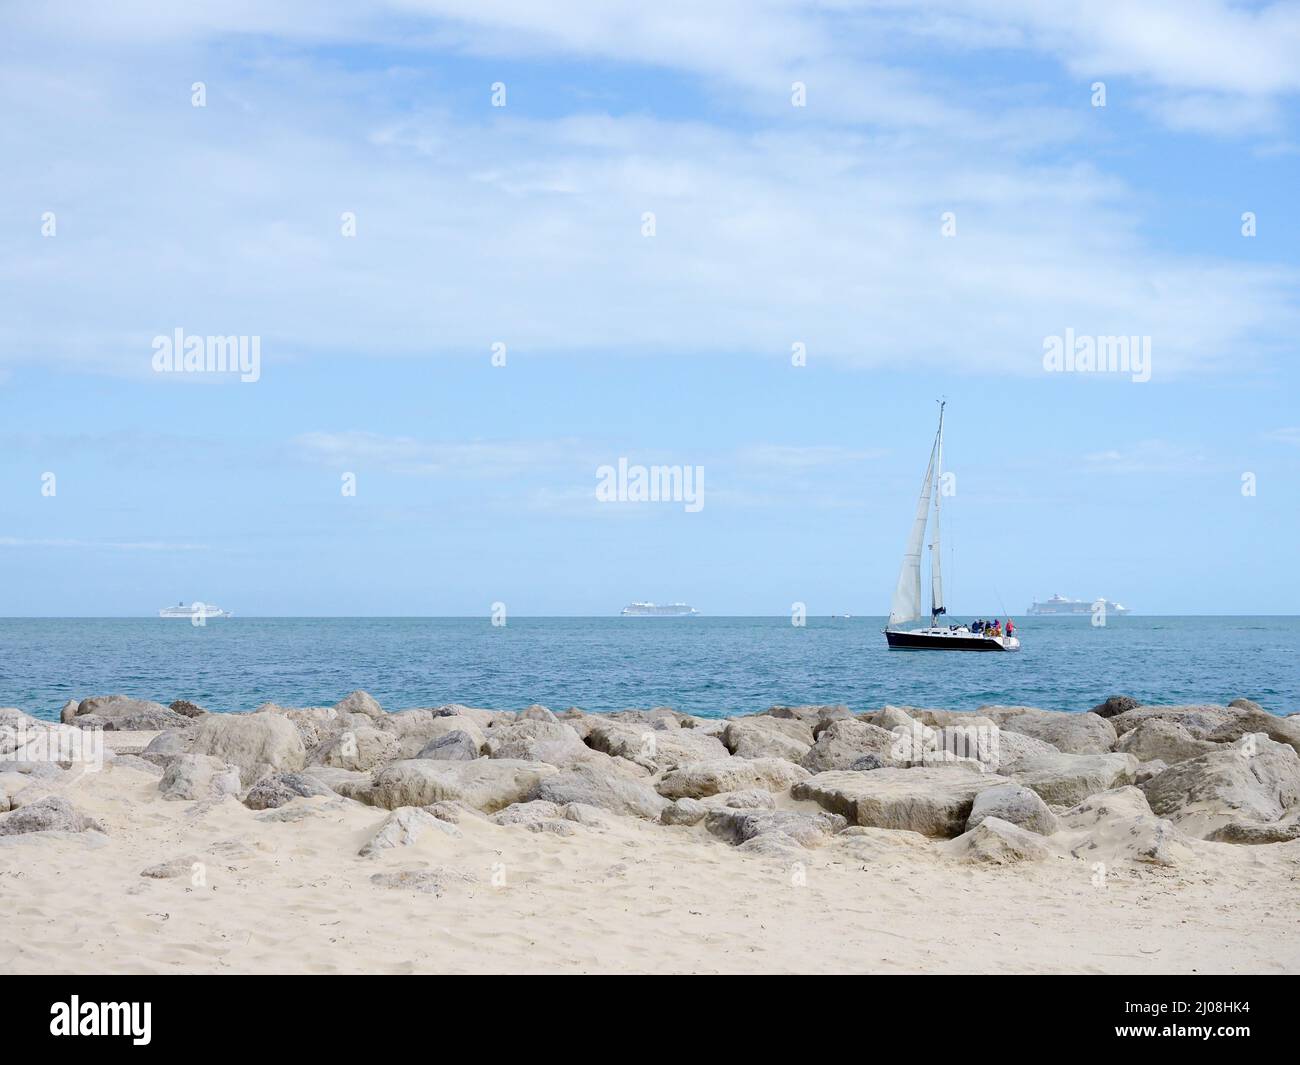 A sailing yacht passing close to the shore with three anchored cruise liners in the distance Stock Photo